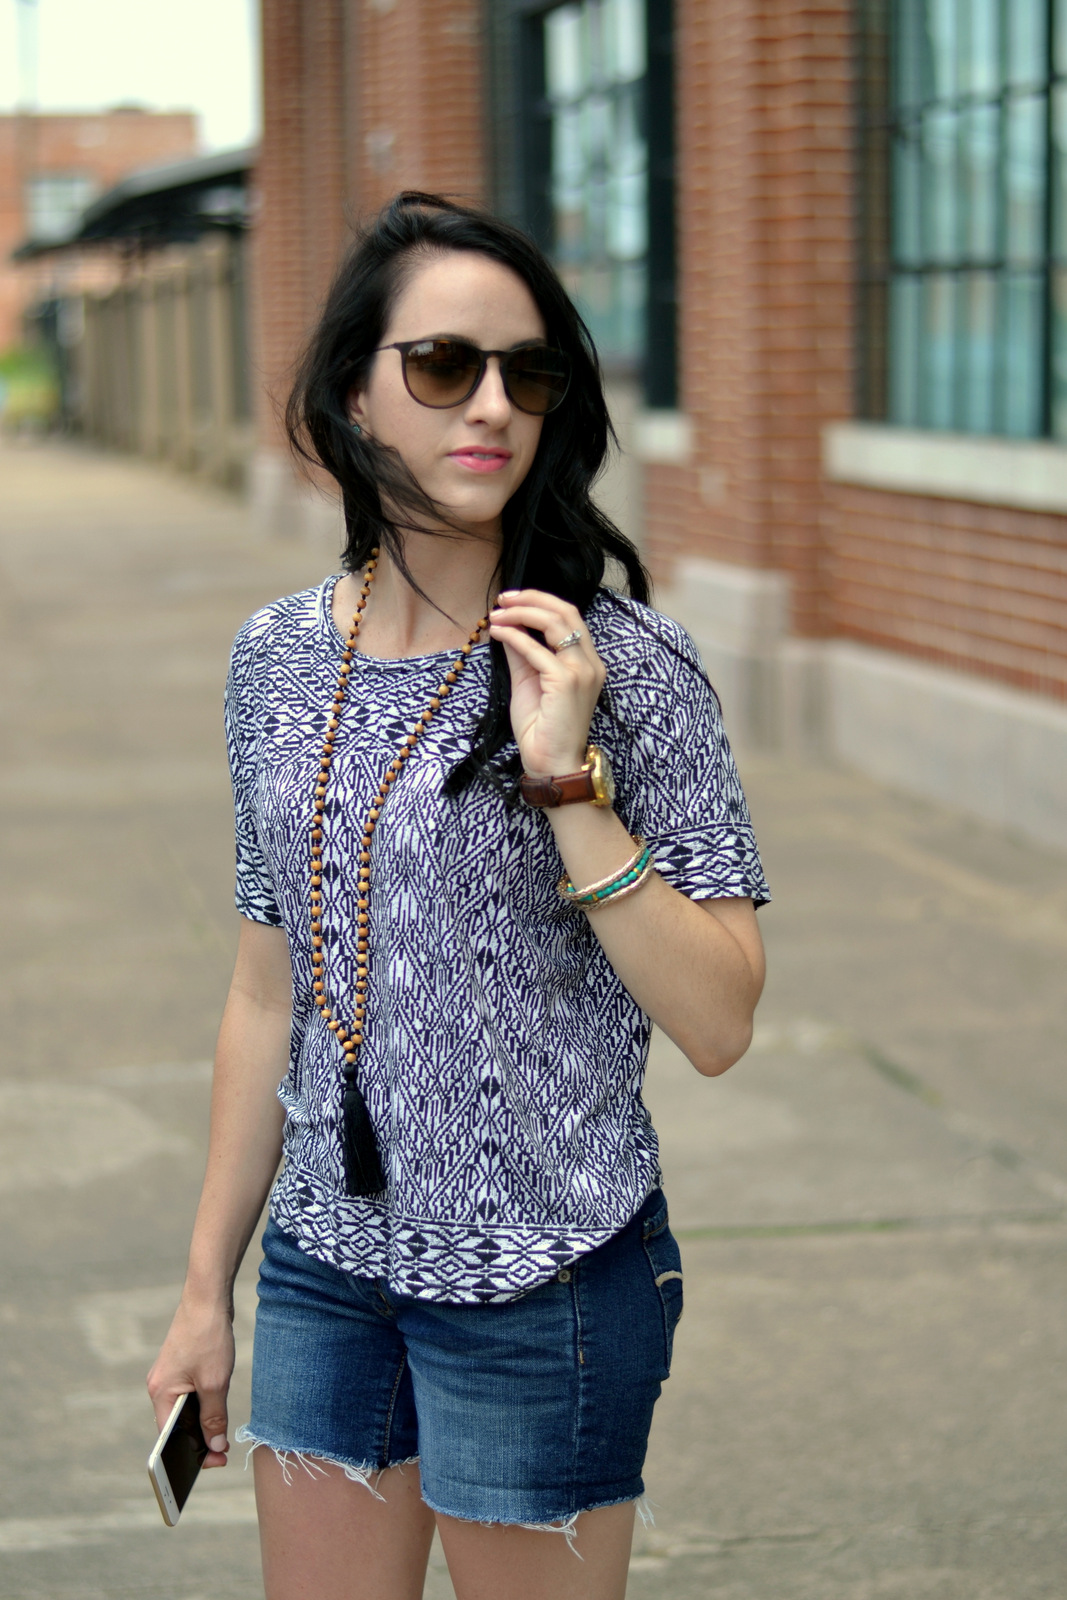 aztec printed tee and tassel necklace